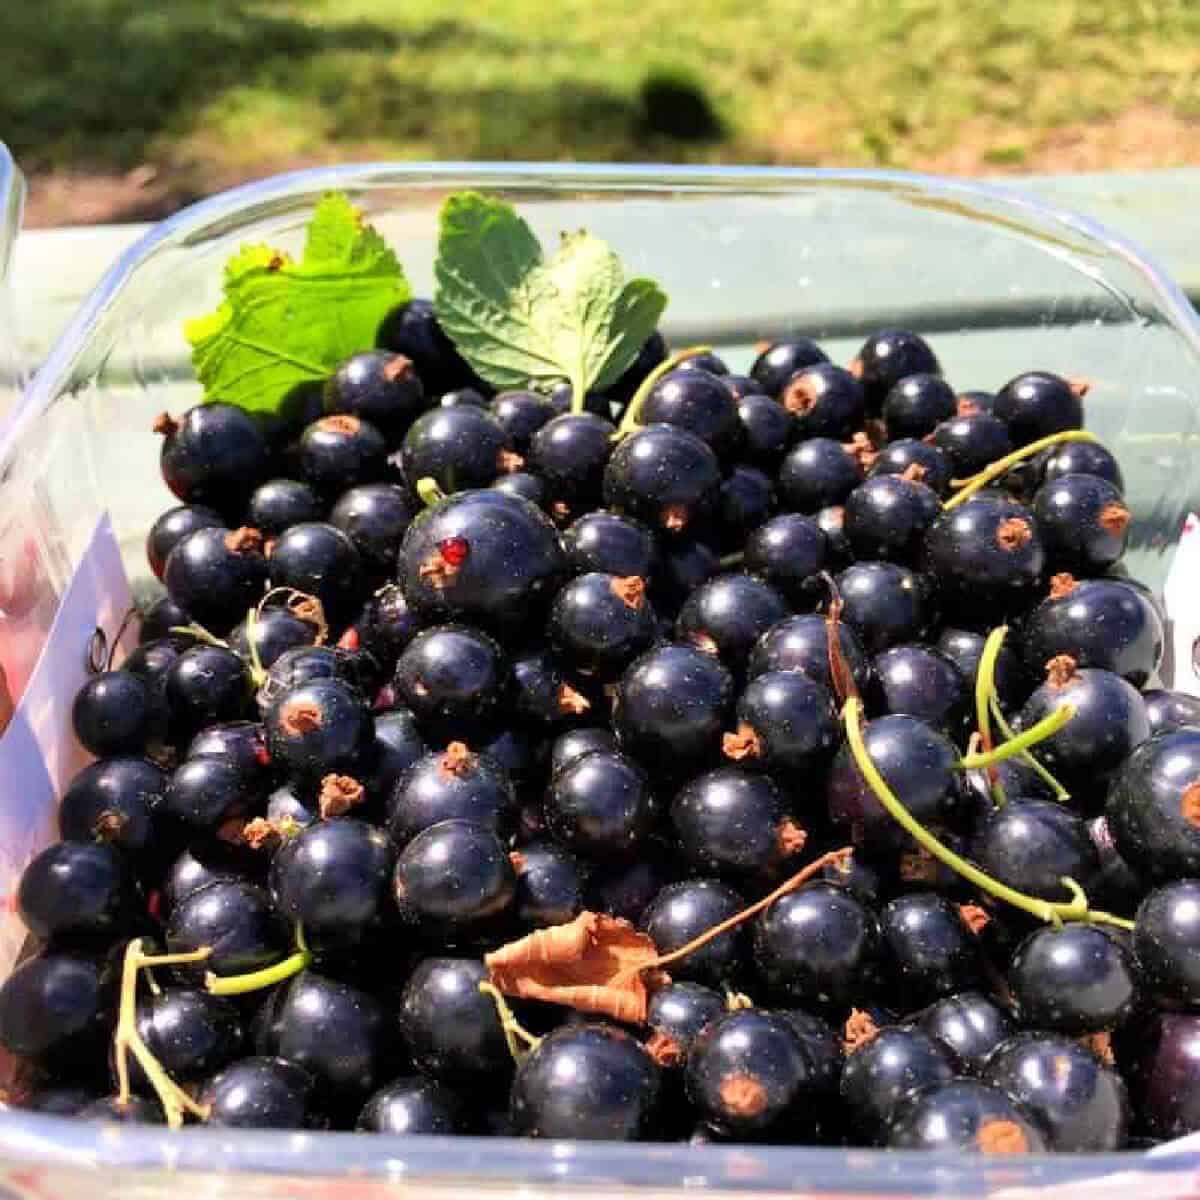 Blackcurrants in a punnet.